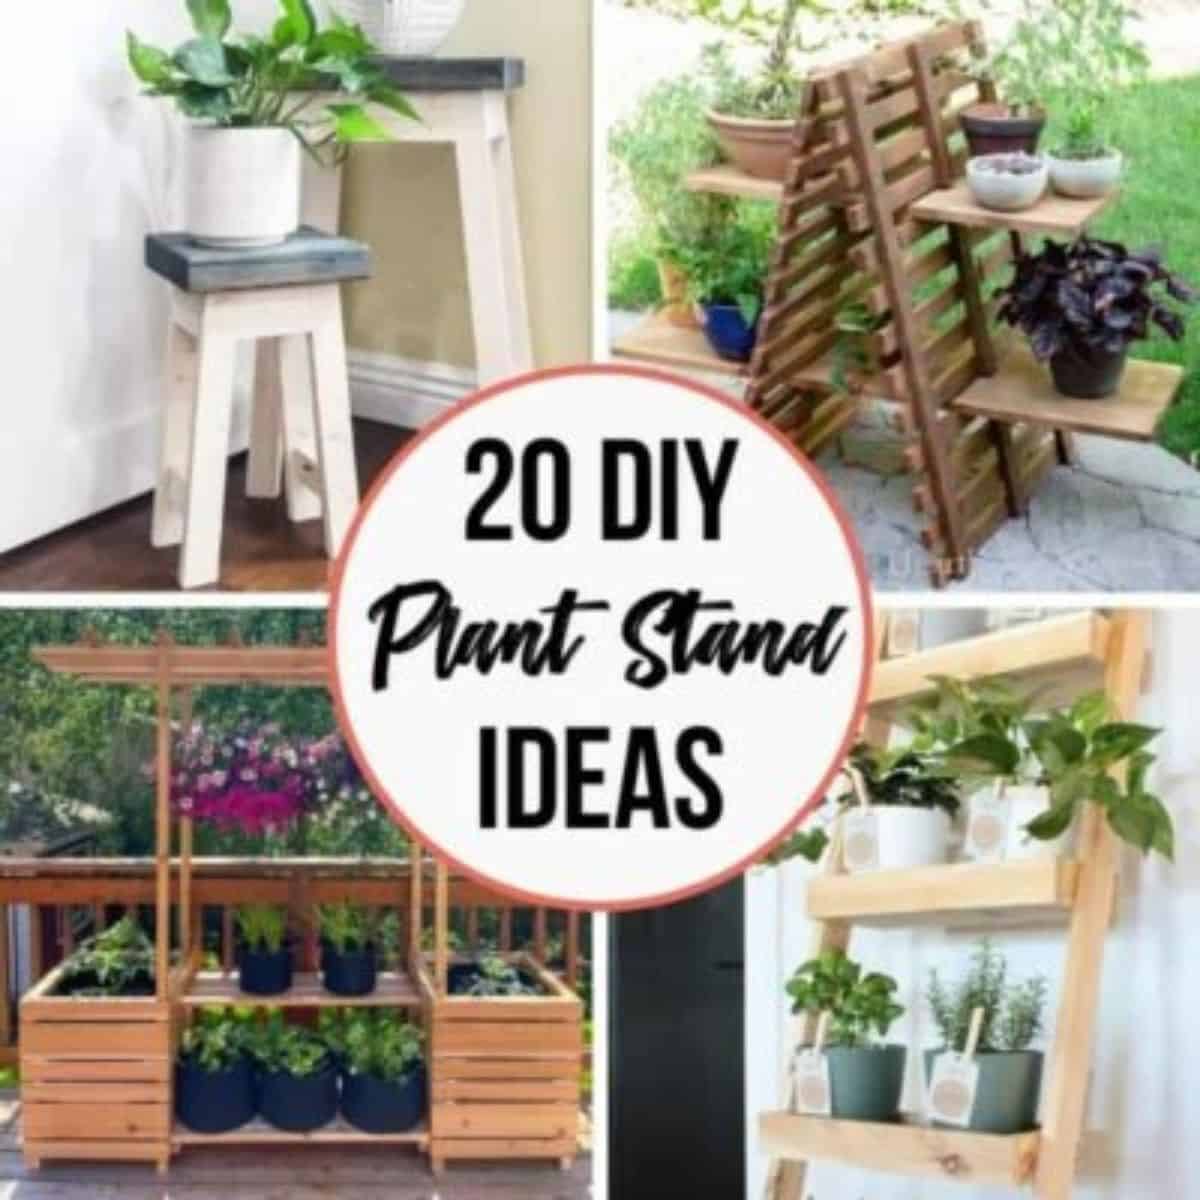 Garden bench/ chunky plant stand 